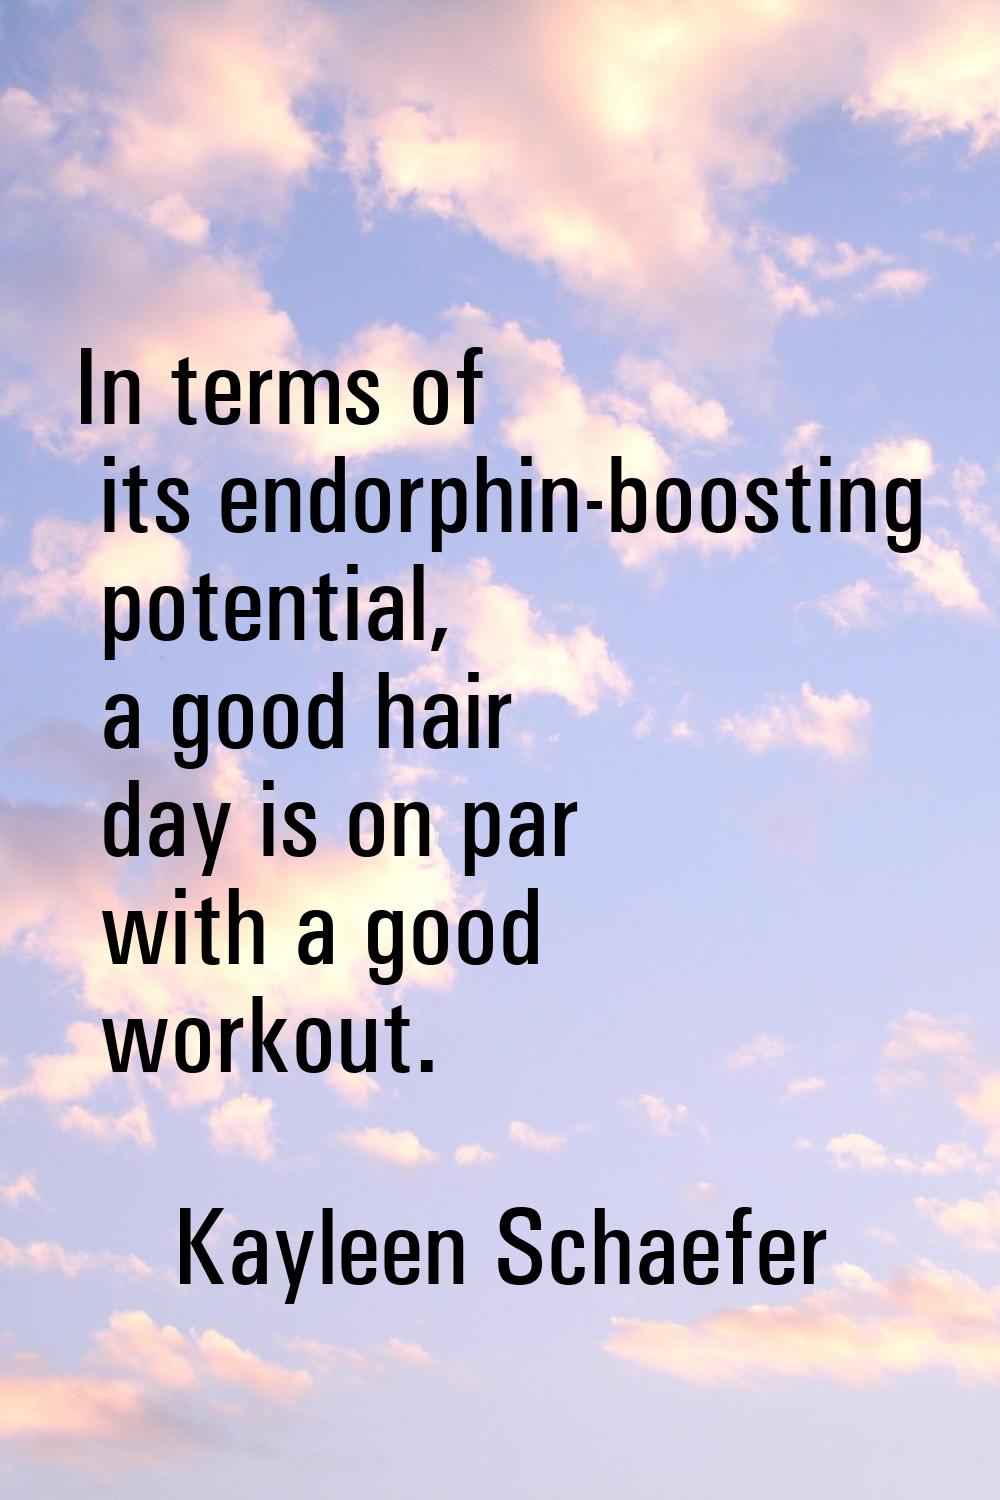 In terms of its endorphin-boosting potential, a good hair day is on par with a good workout.